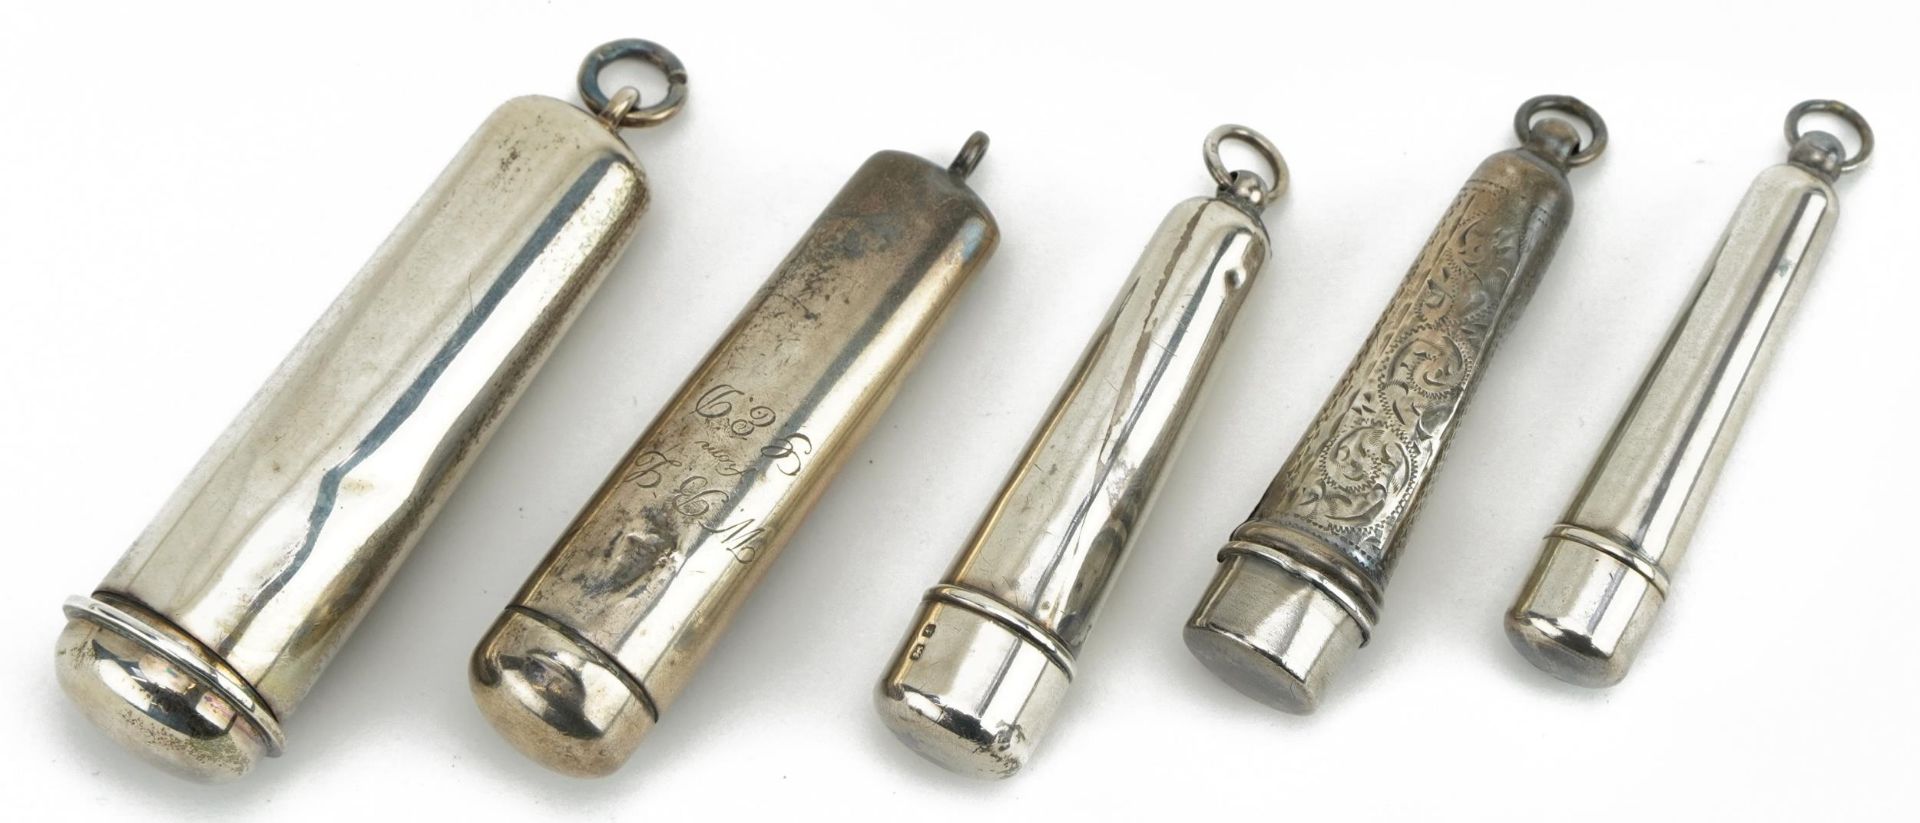 Five Edwardian and later silver cigarette holder cases, one with engraved decoration, various